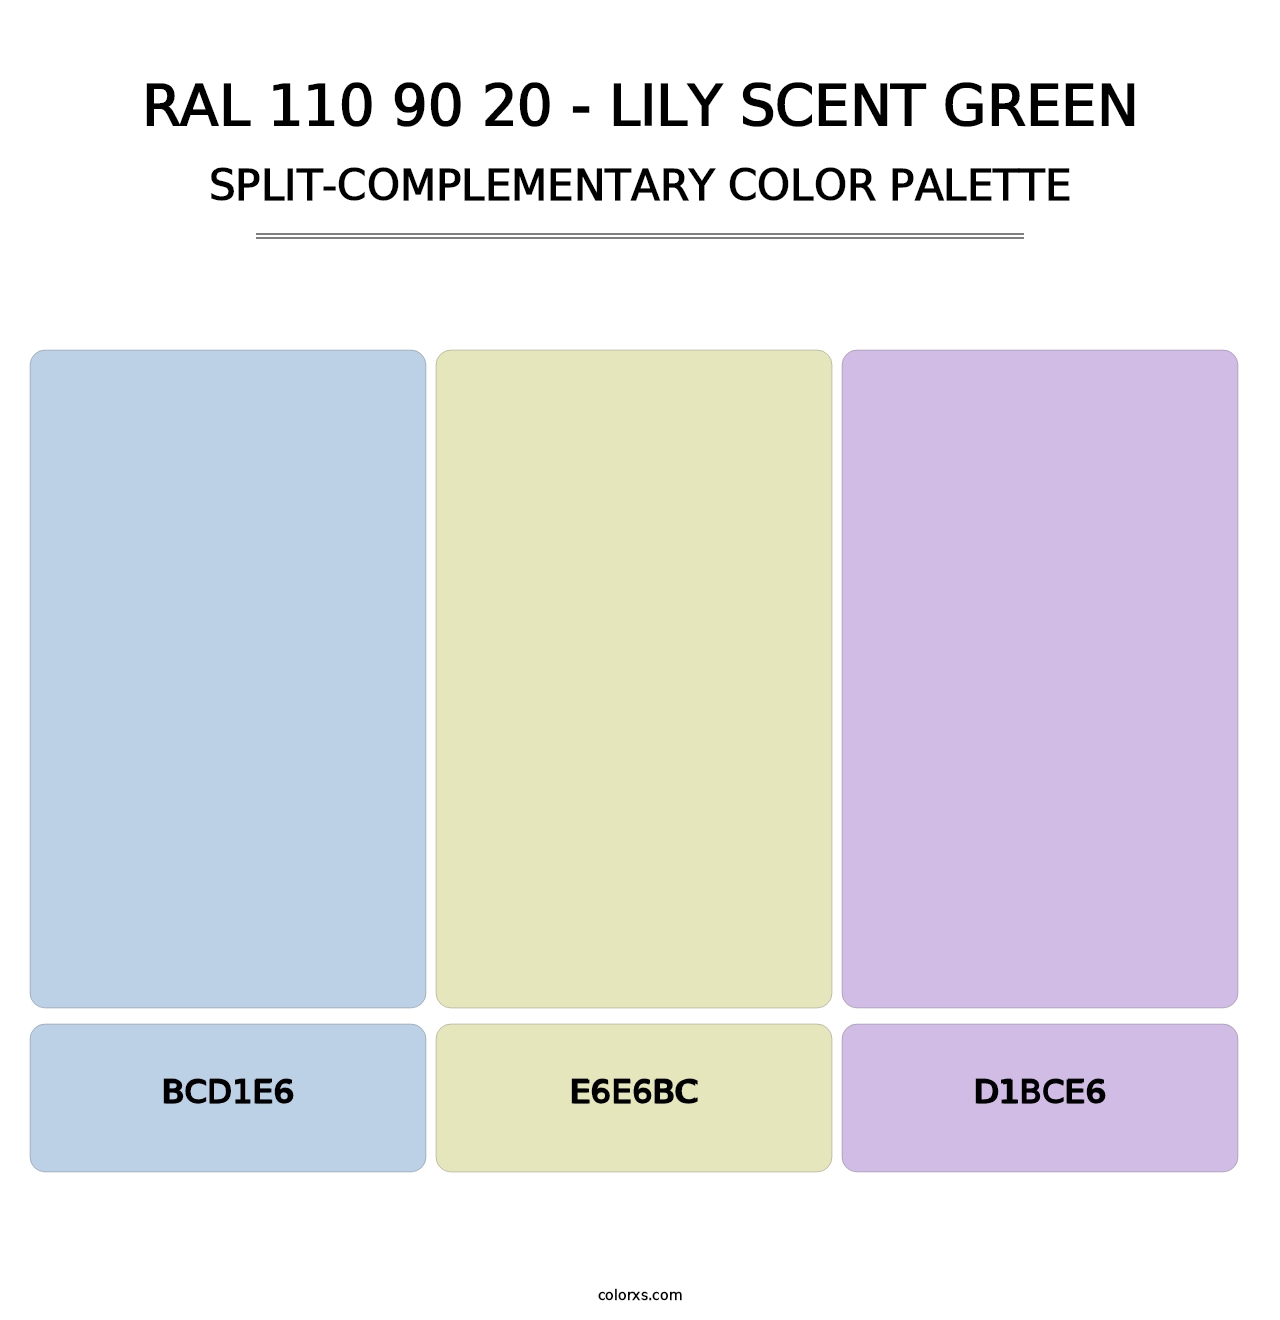 RAL 110 90 20 - Lily Scent Green - Split-Complementary Color Palette